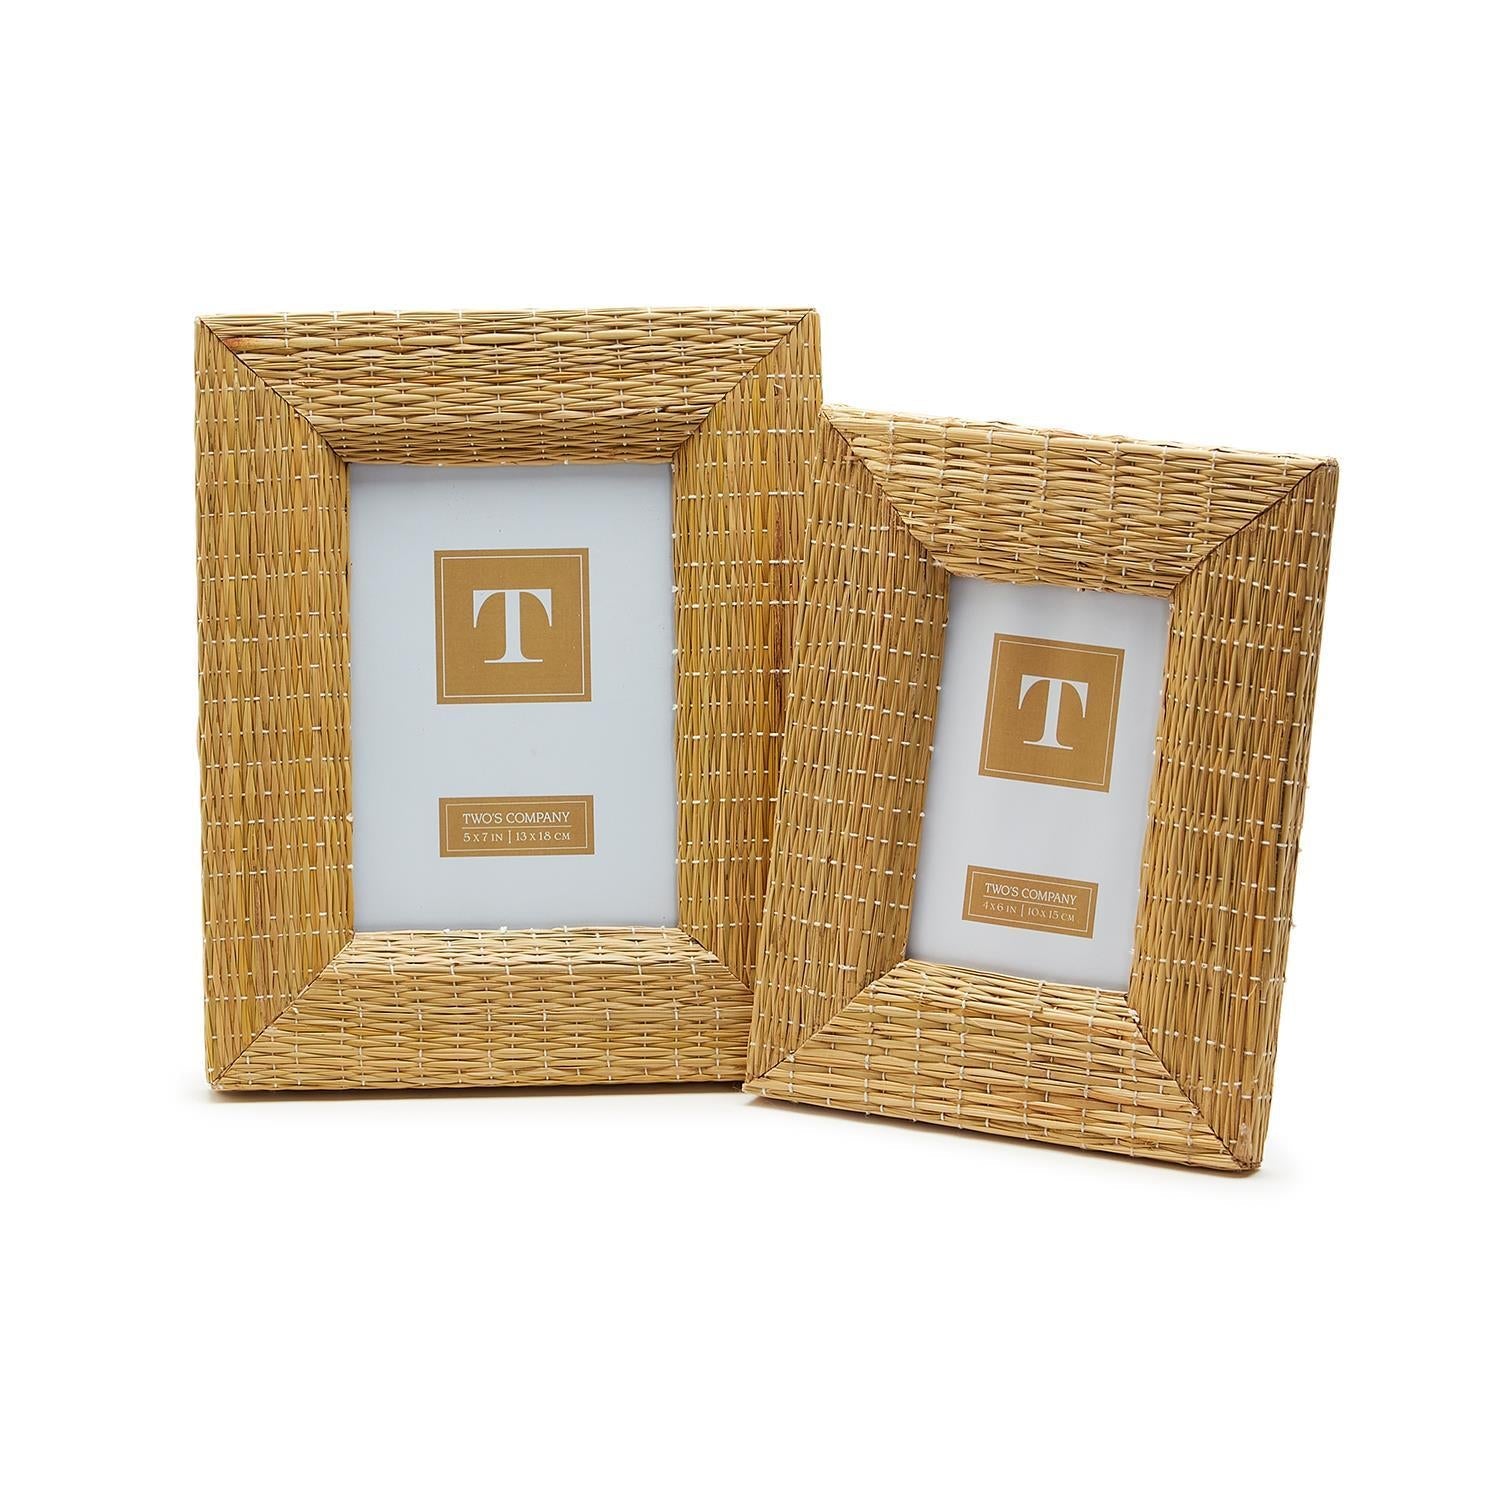 Woven Reeds S/2 Cane Photo Frames  Includes 4x6 and 5x8